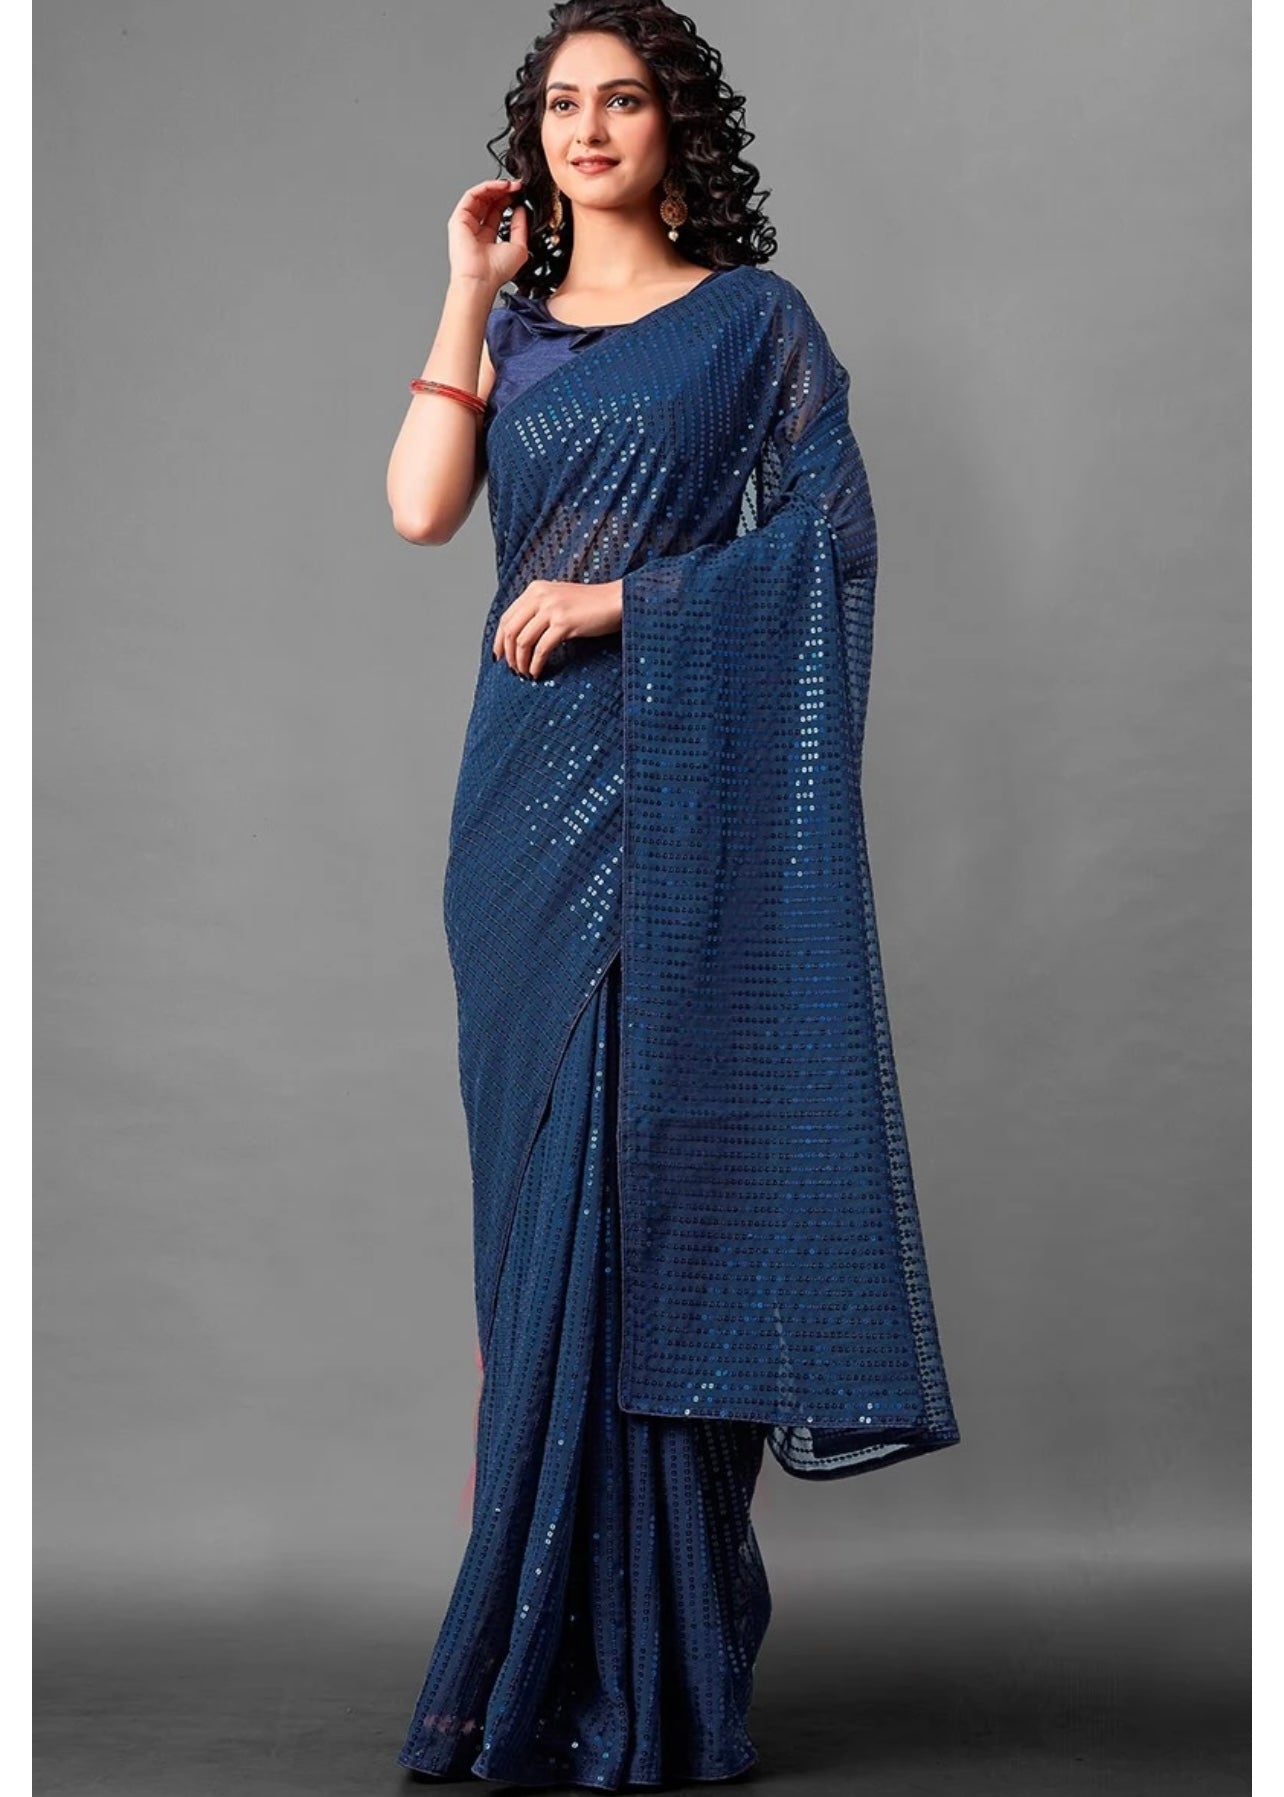 Pre-stitched Blue Sequin Saree and Blouse (Set)